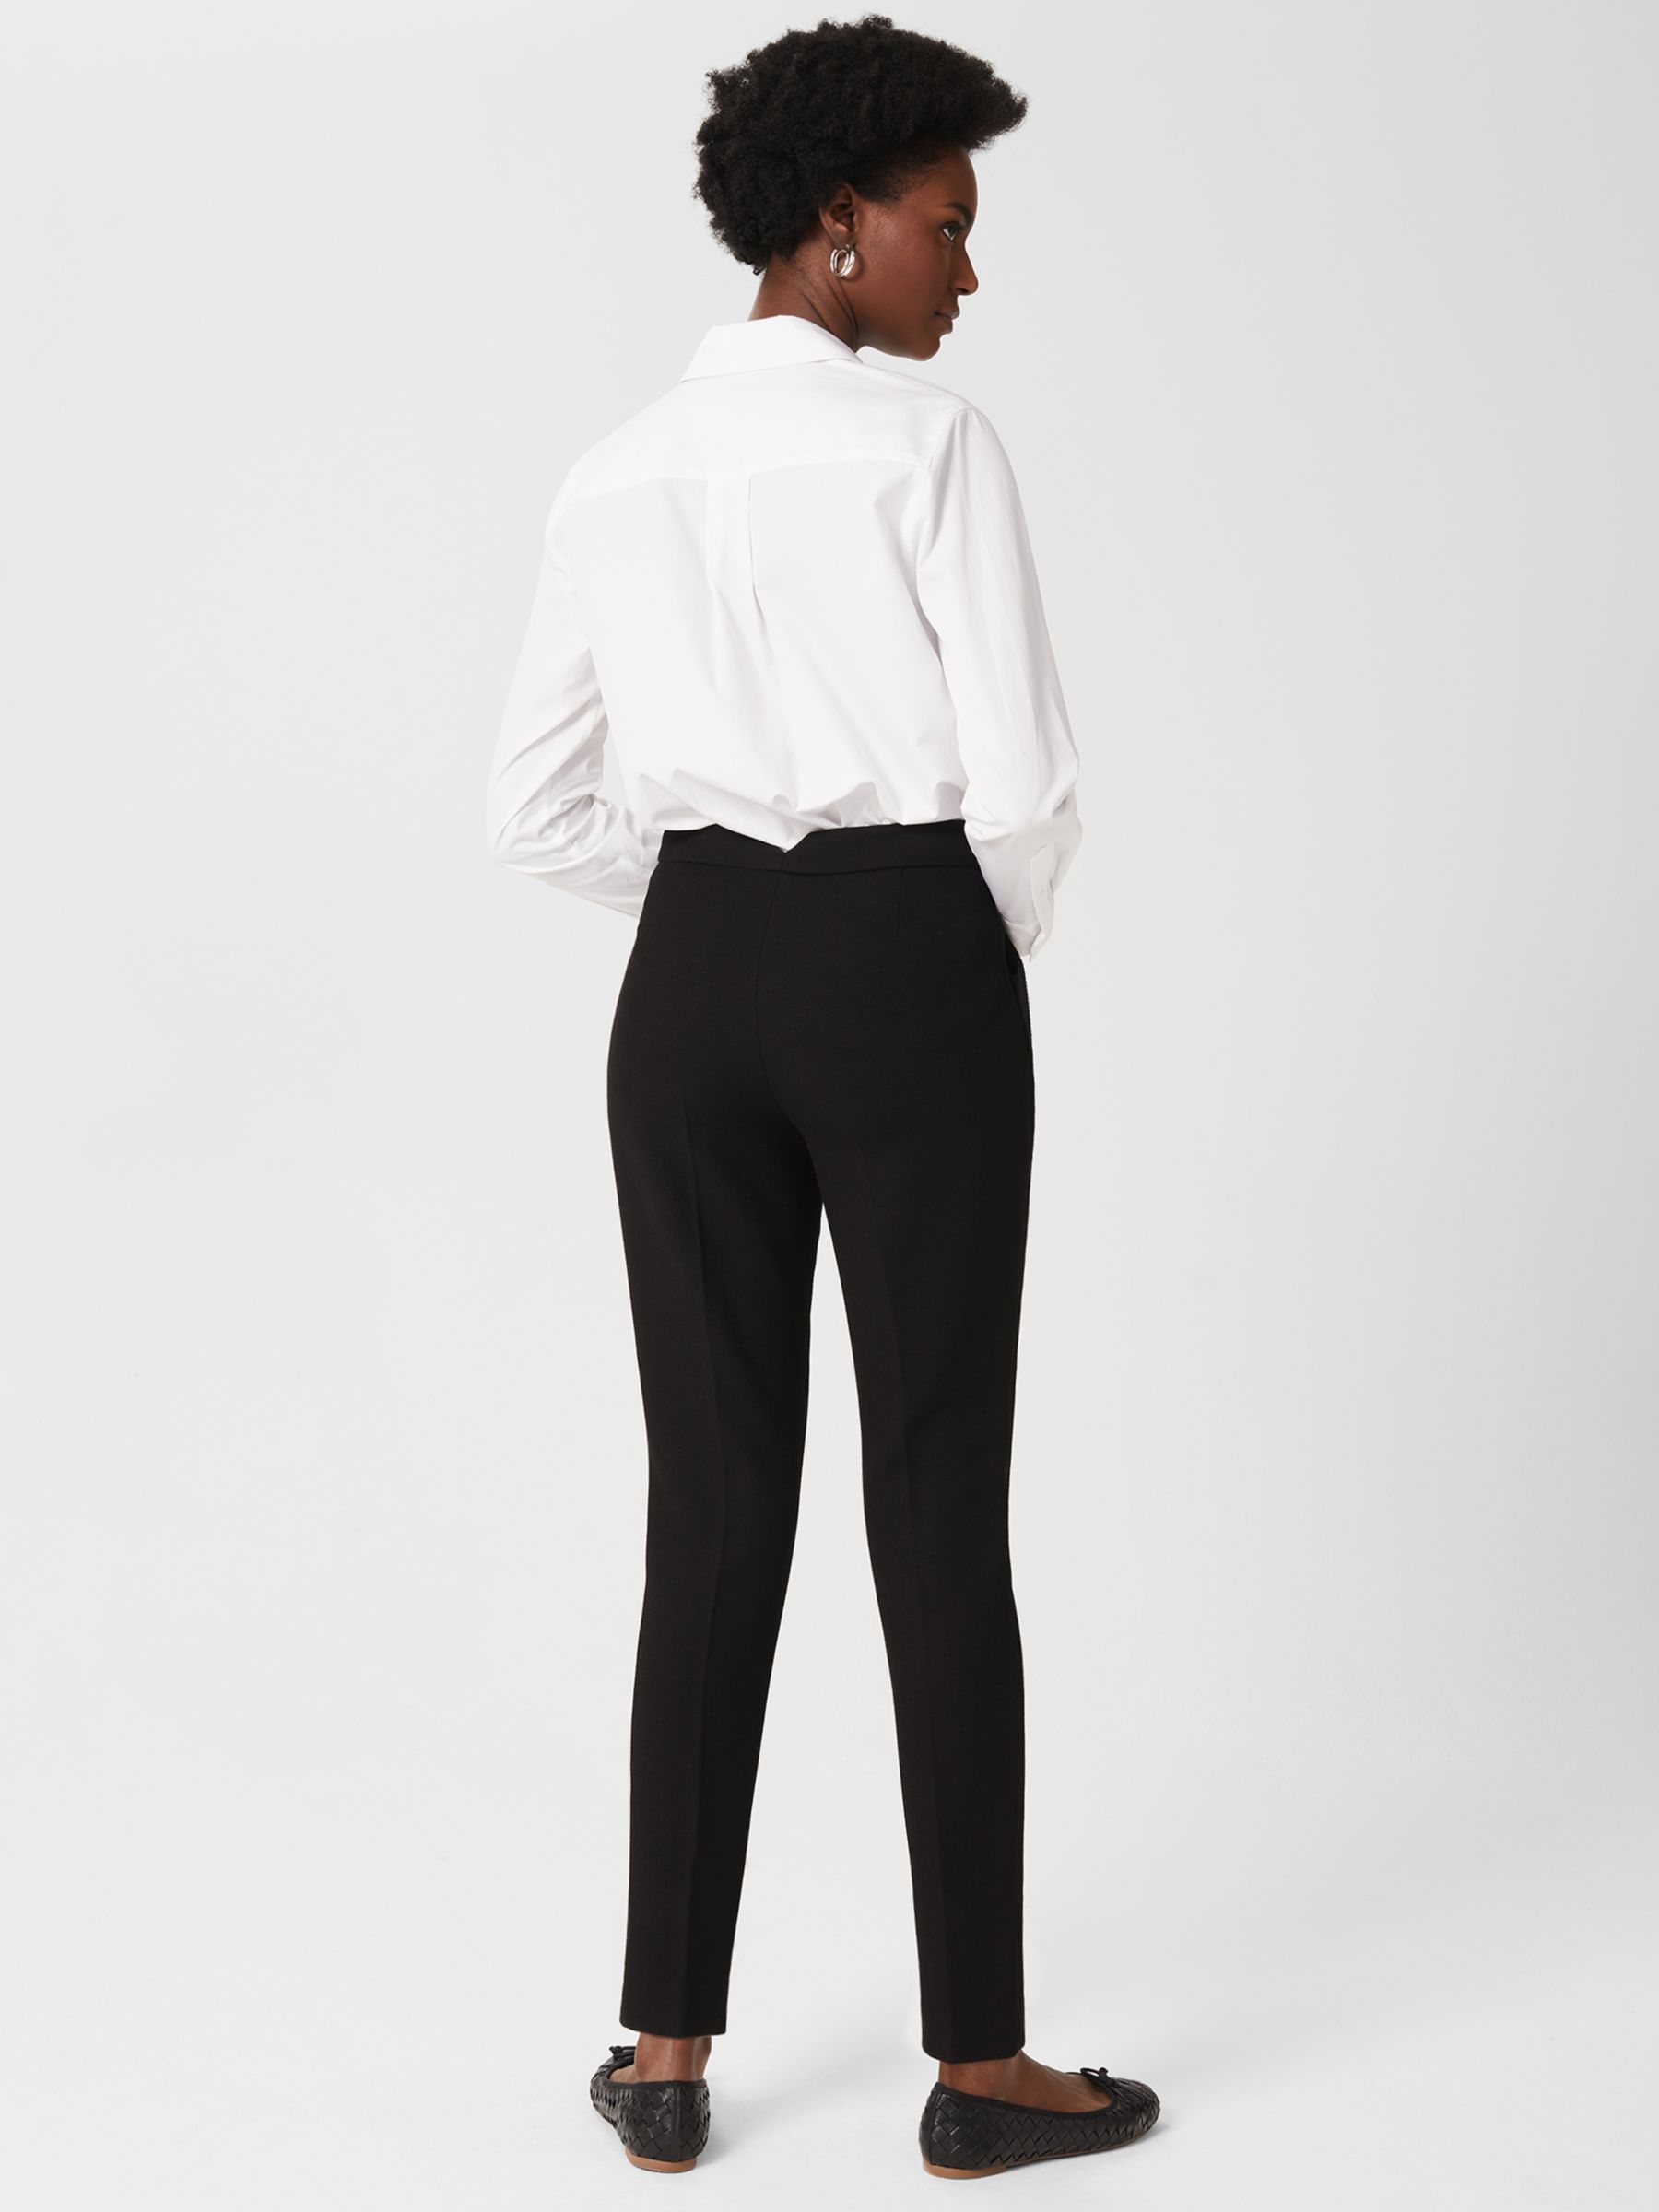 Women's Straight Fit Trousers, Slim, Skinny, Fitted, Hobbs London